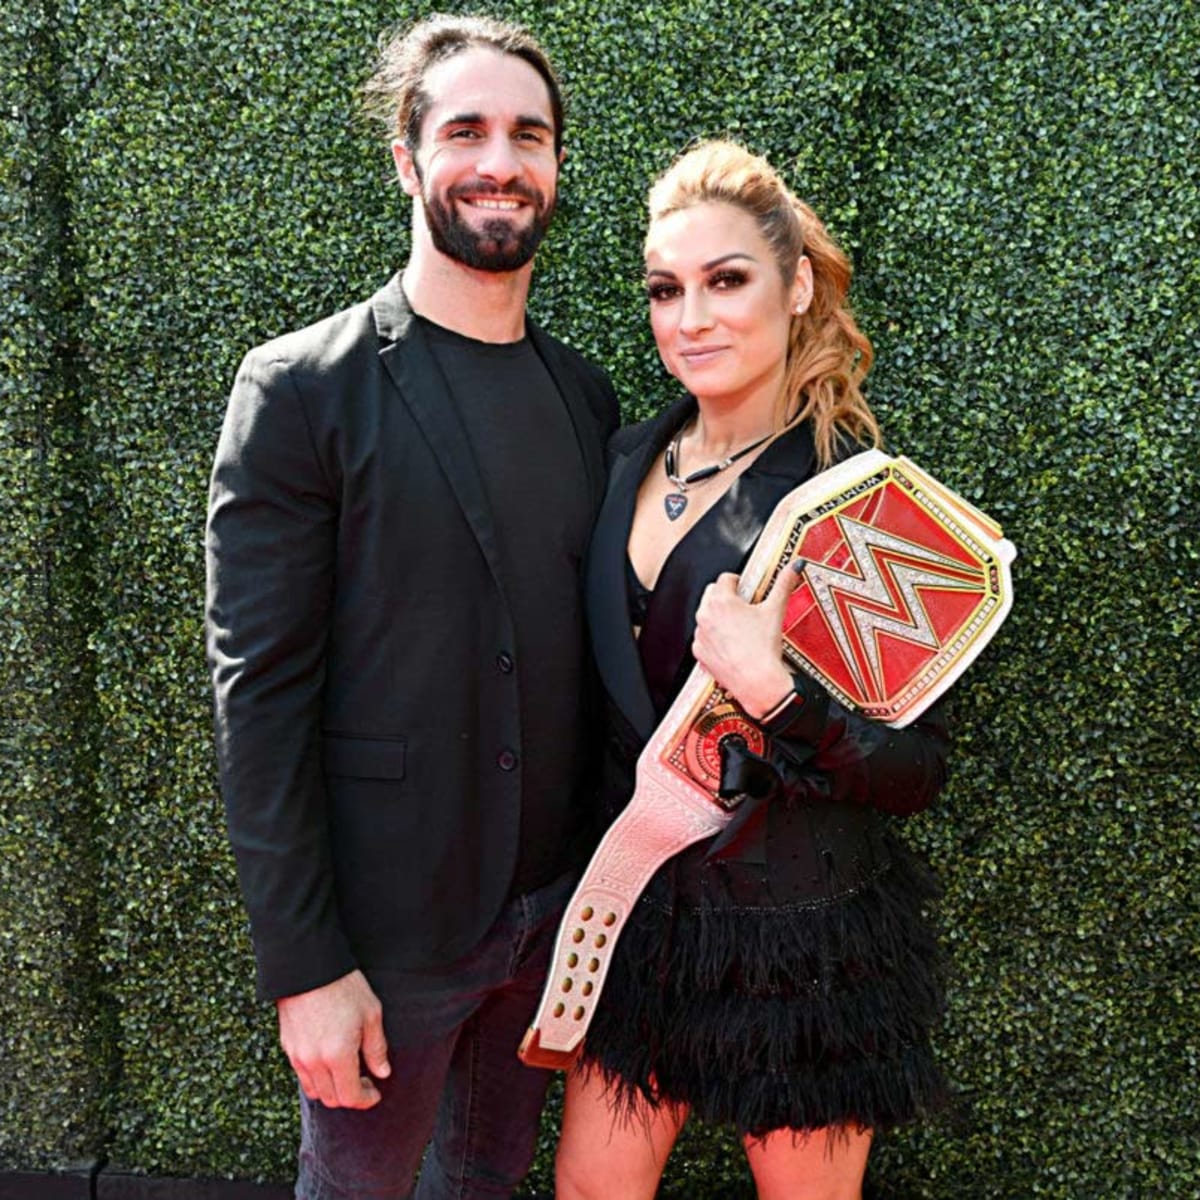 Seth Rollins and Becky Lynch Confirm Relationship in Photo